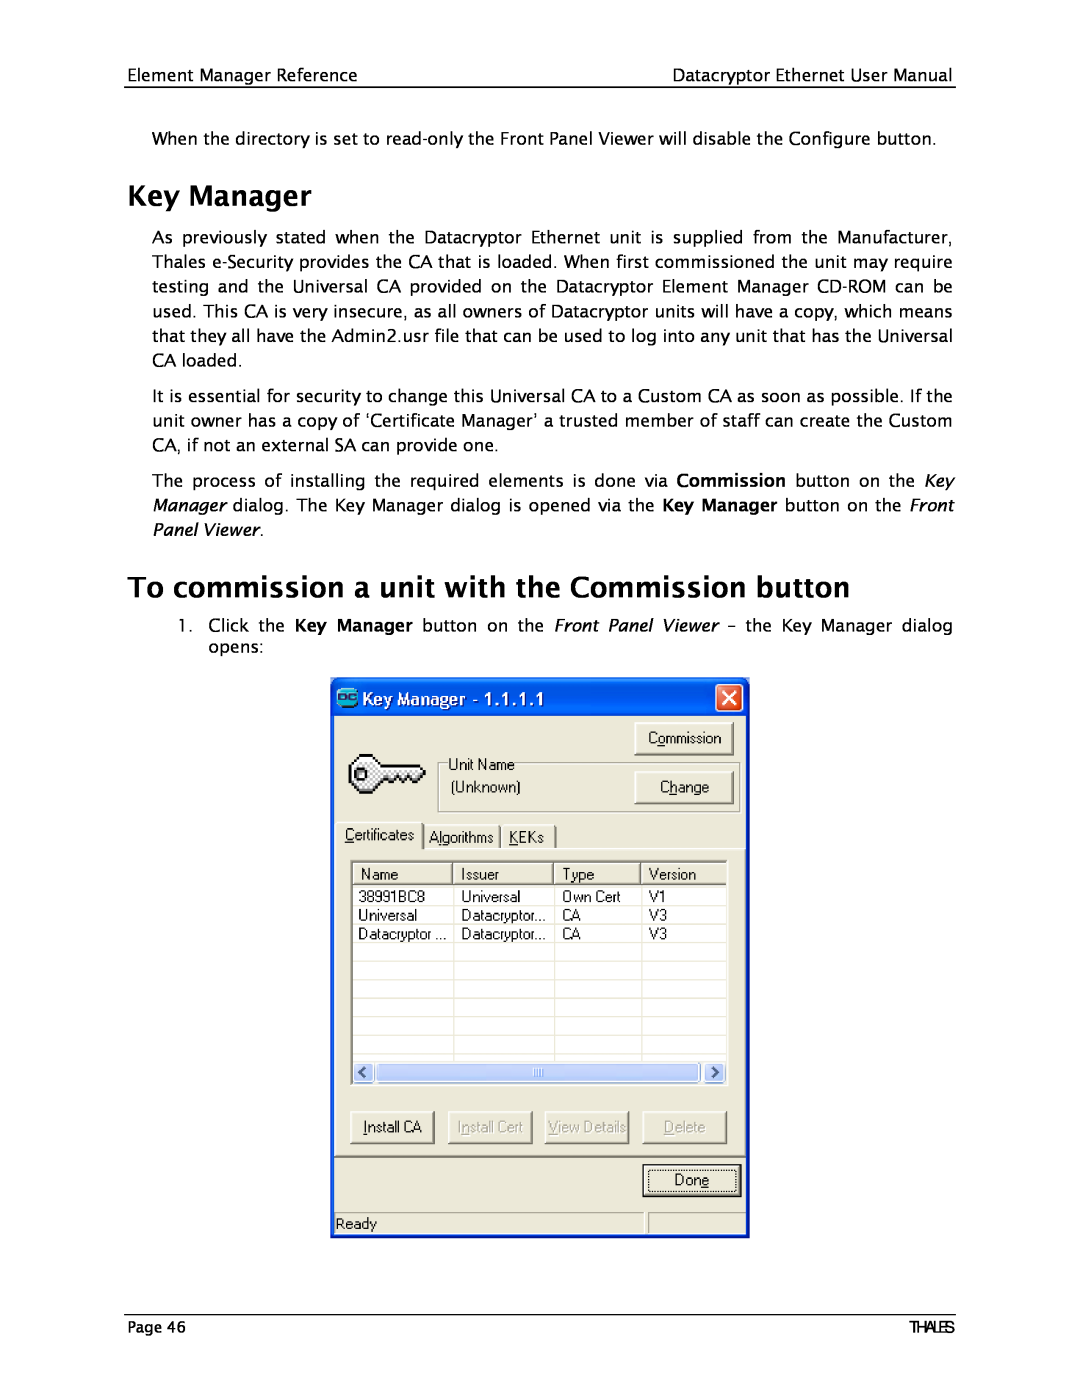 Angenieux 1270A450-005 user manual Key Manager, To commission a unit with the Commission button 